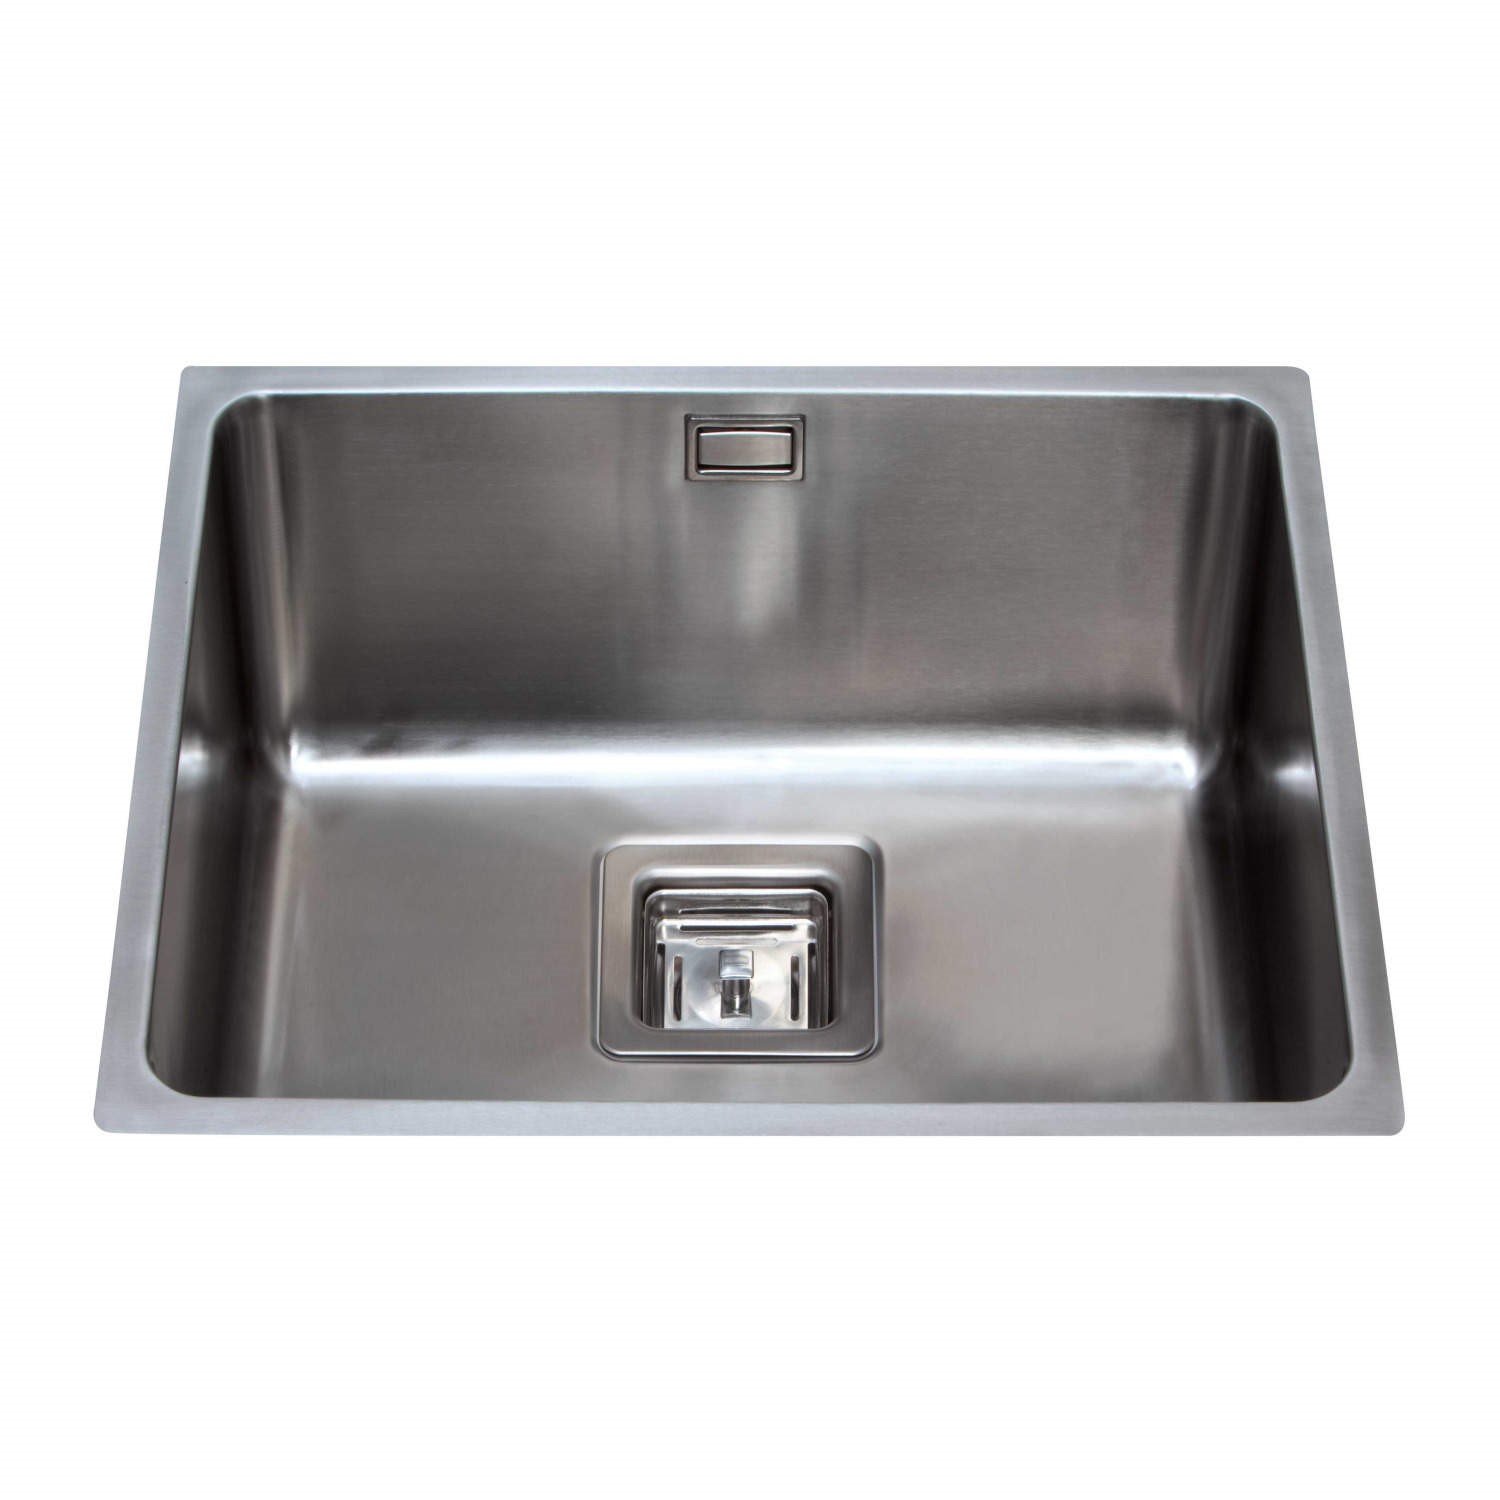 Grade A1 Cda Ksc24ss Square Undermount Single Bowl Stainless Steel Sink